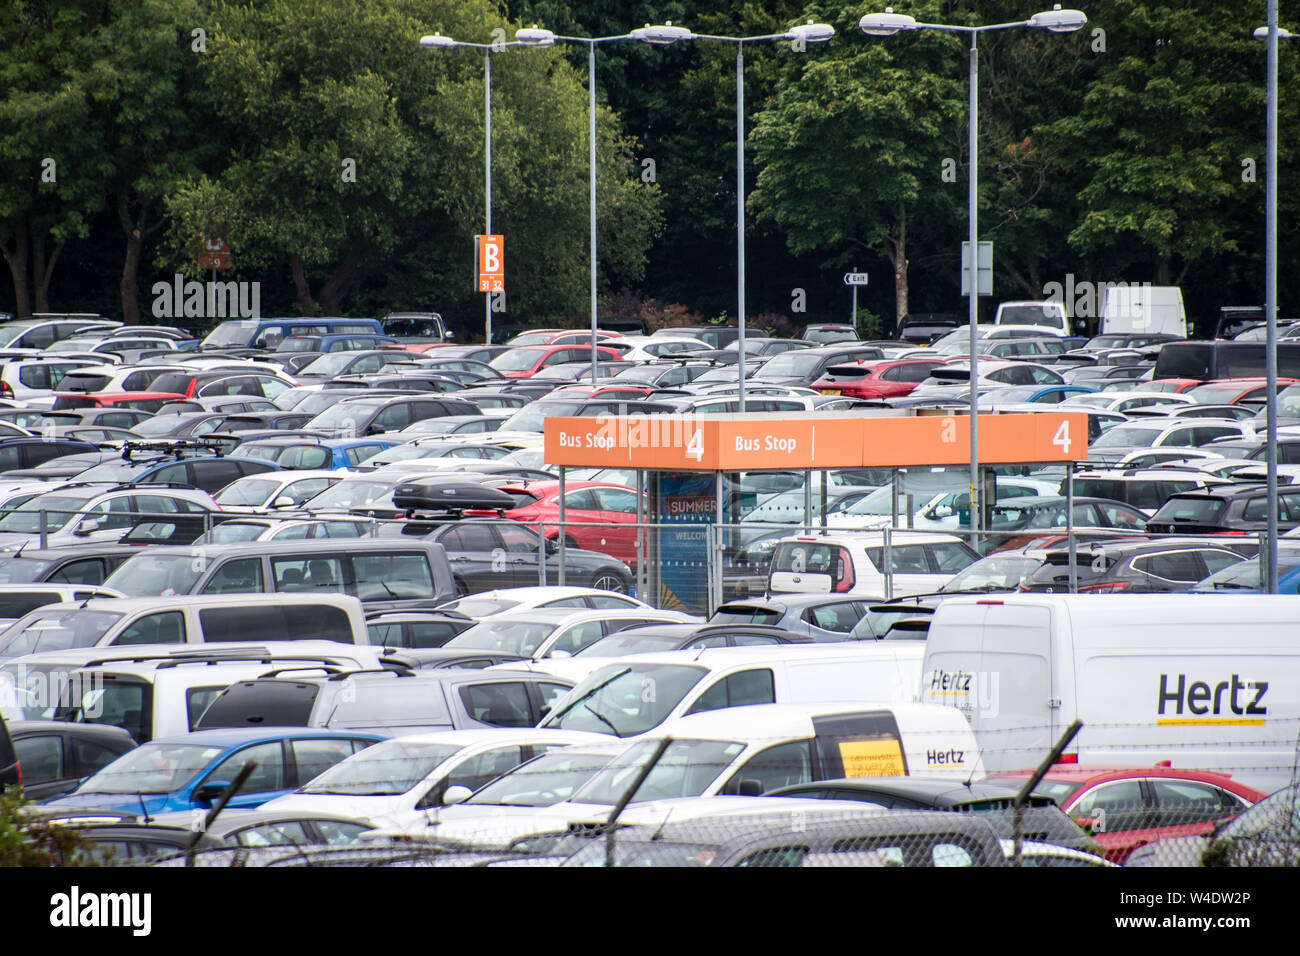 Gatwick airport long stay car park top down view Stock Photo - Alamy